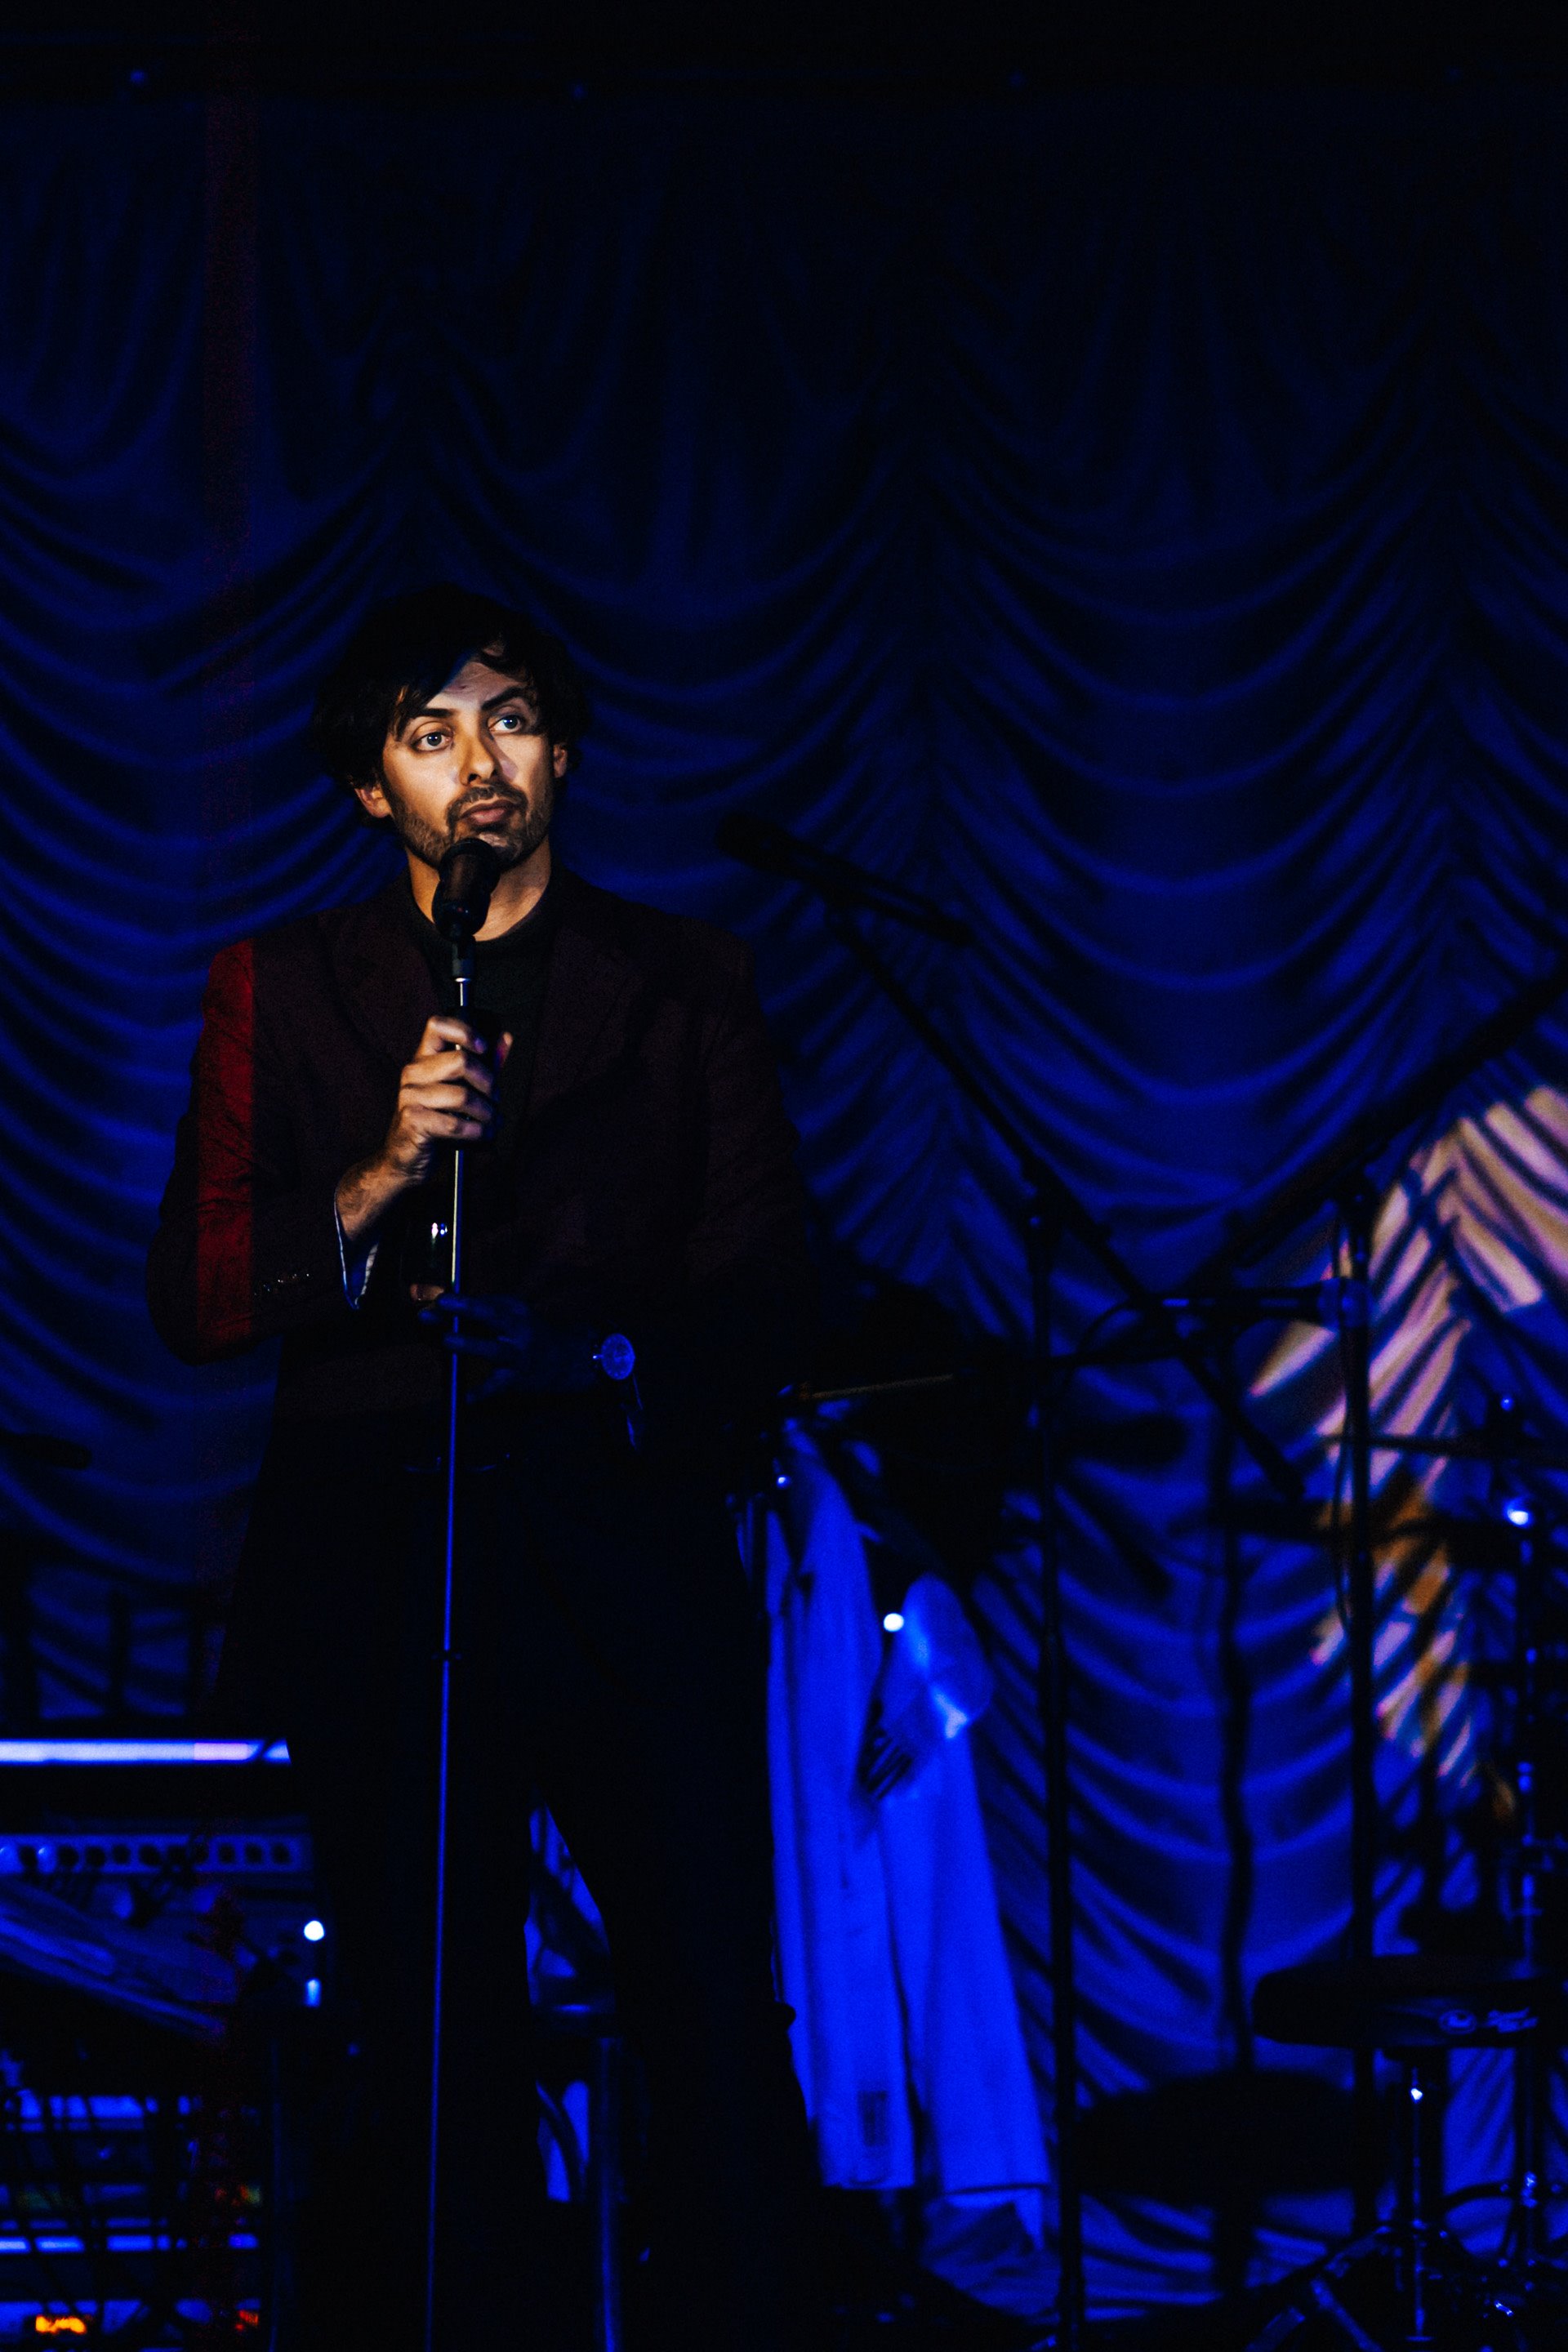 Dry stand up comedian Marcel lucont looks blankly at the audience in a purple suit and bare feet on stage at a cabaret dinner